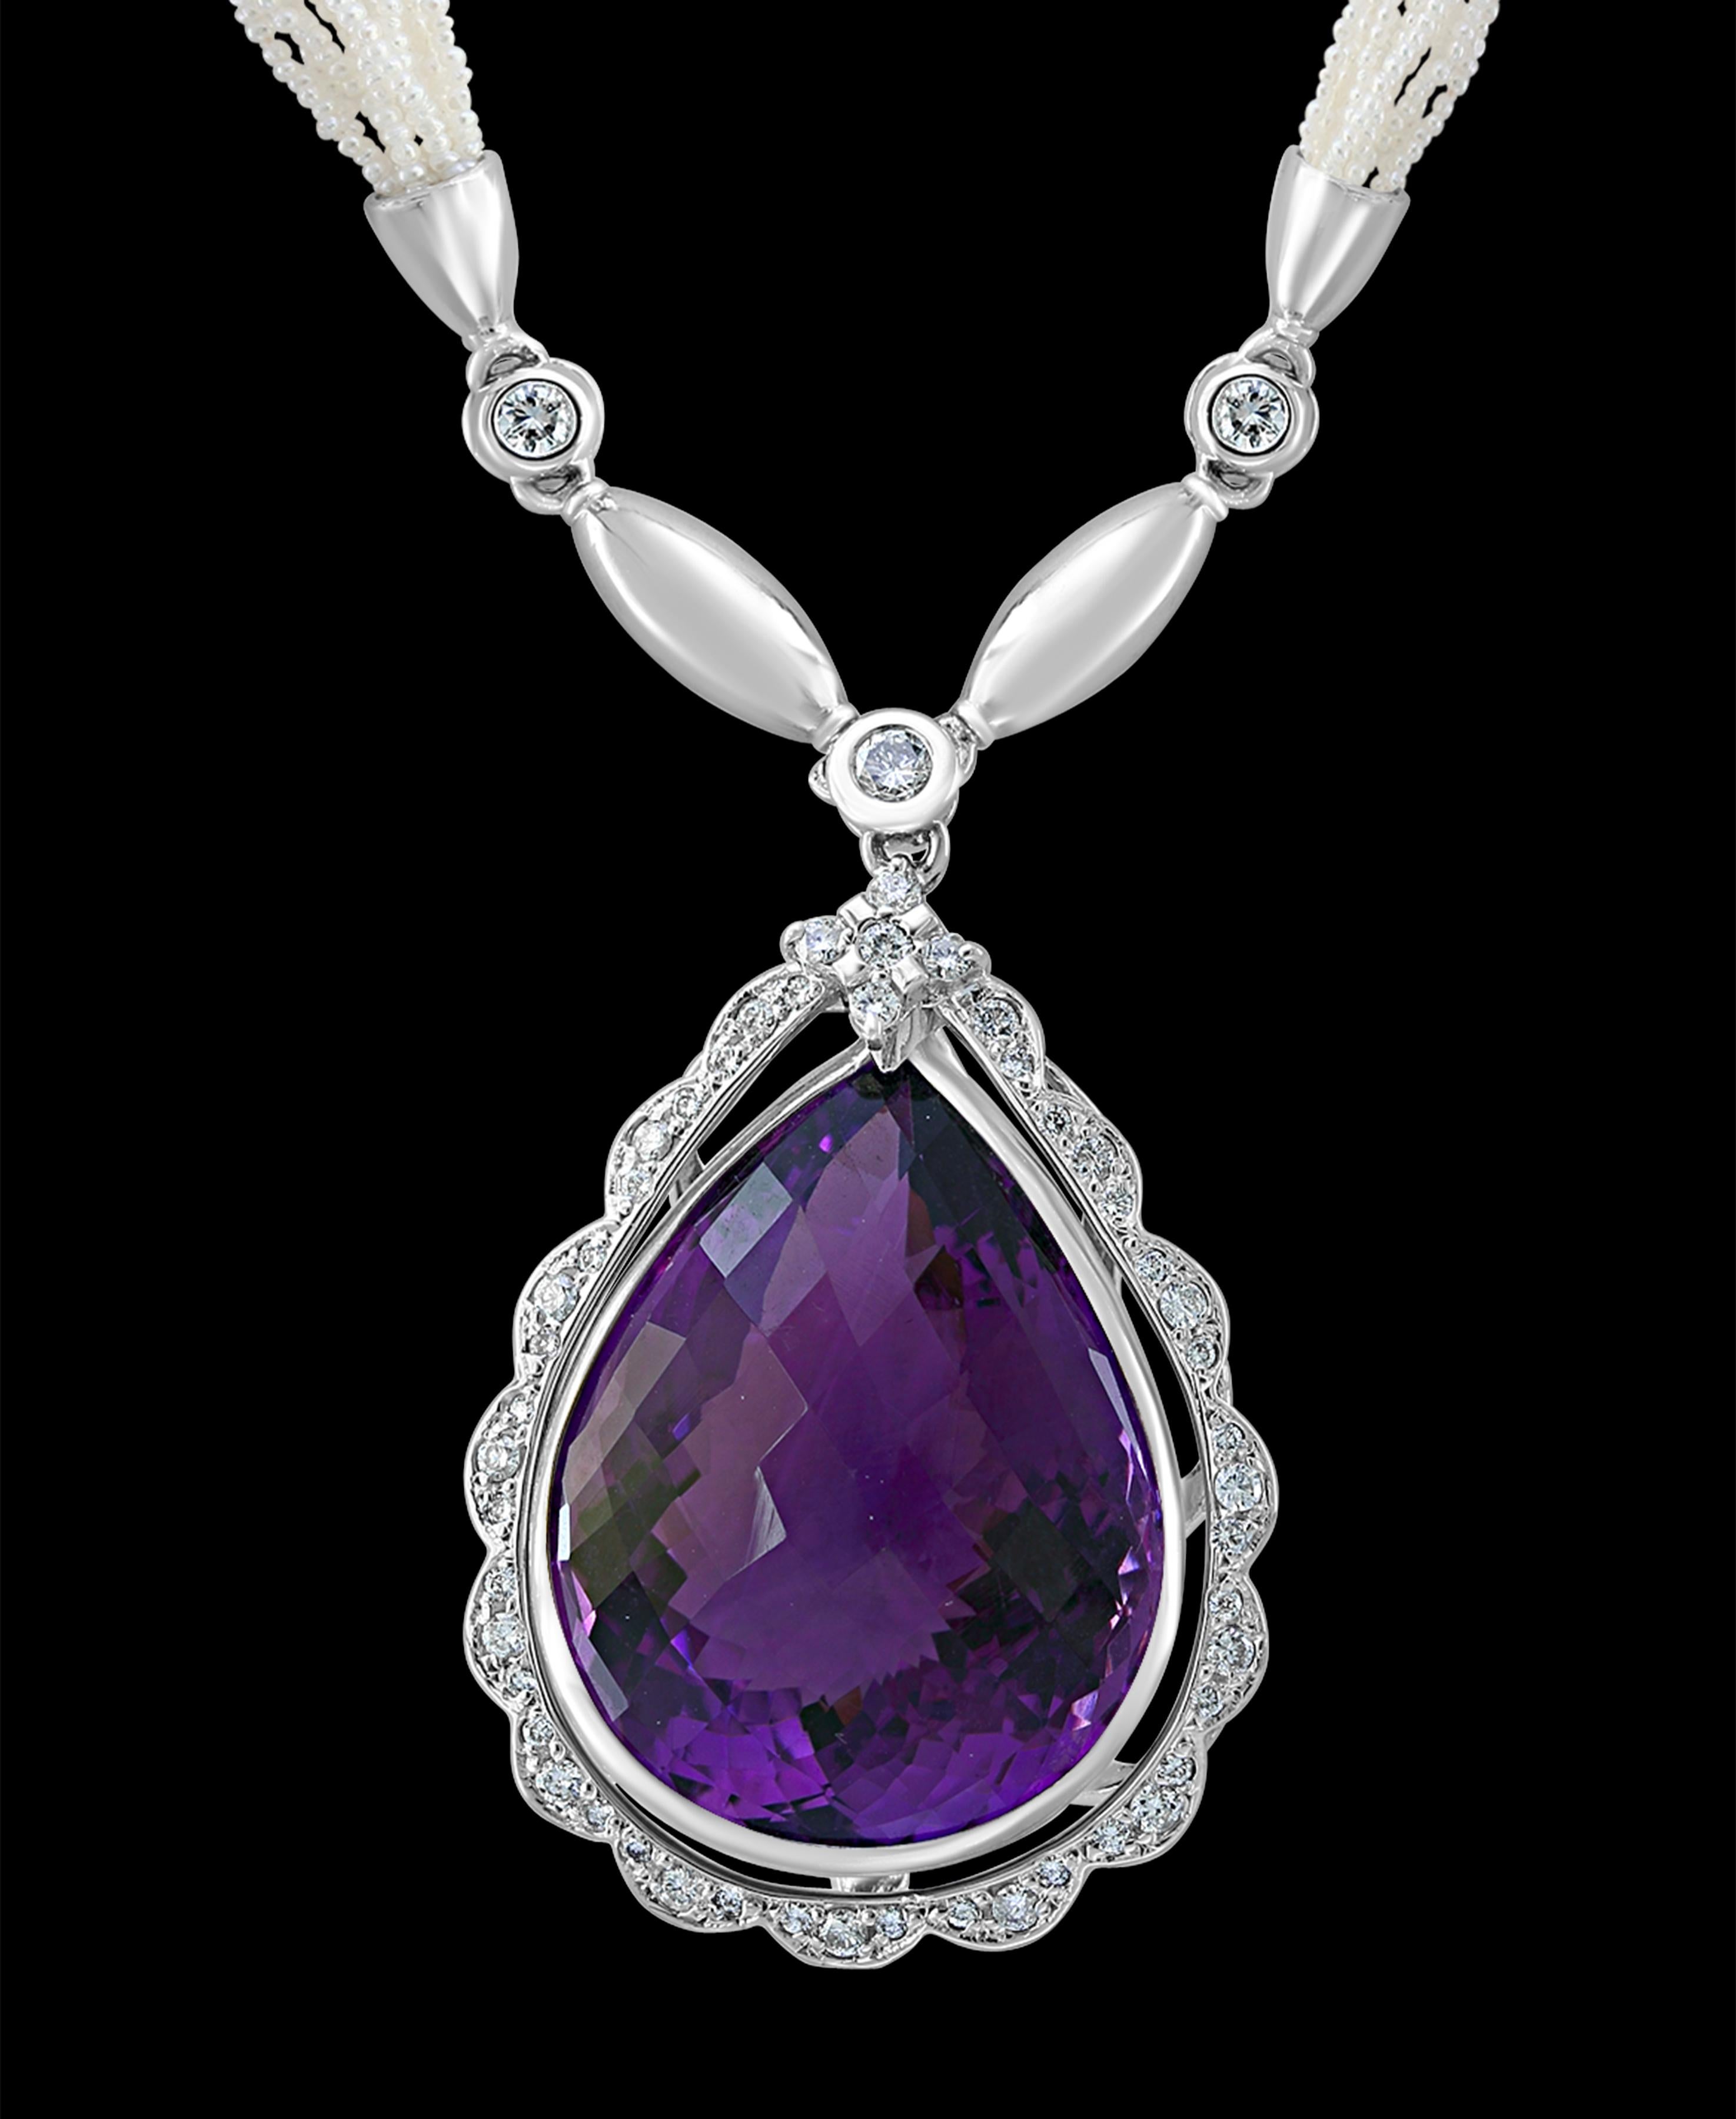 54 Carat Tear Drop Amethyst and Diamonds with Seed Pearl Necklace 18 Karat Gold In Excellent Condition For Sale In New York, NY